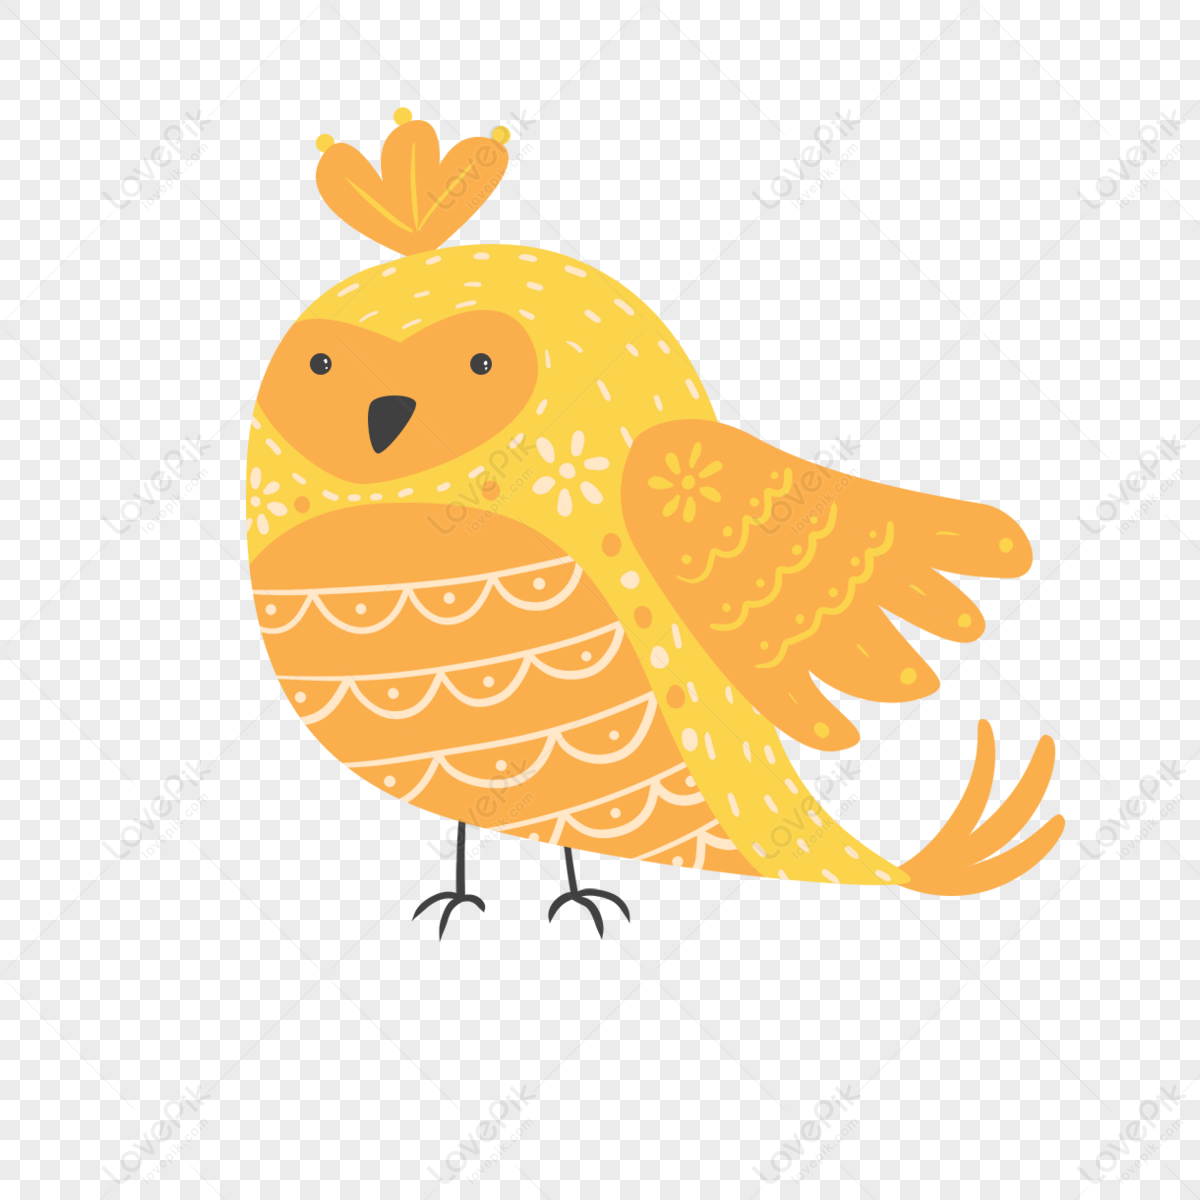 Abstract cute yellow bird animals,greeting card,cartoon,characters png transparent image